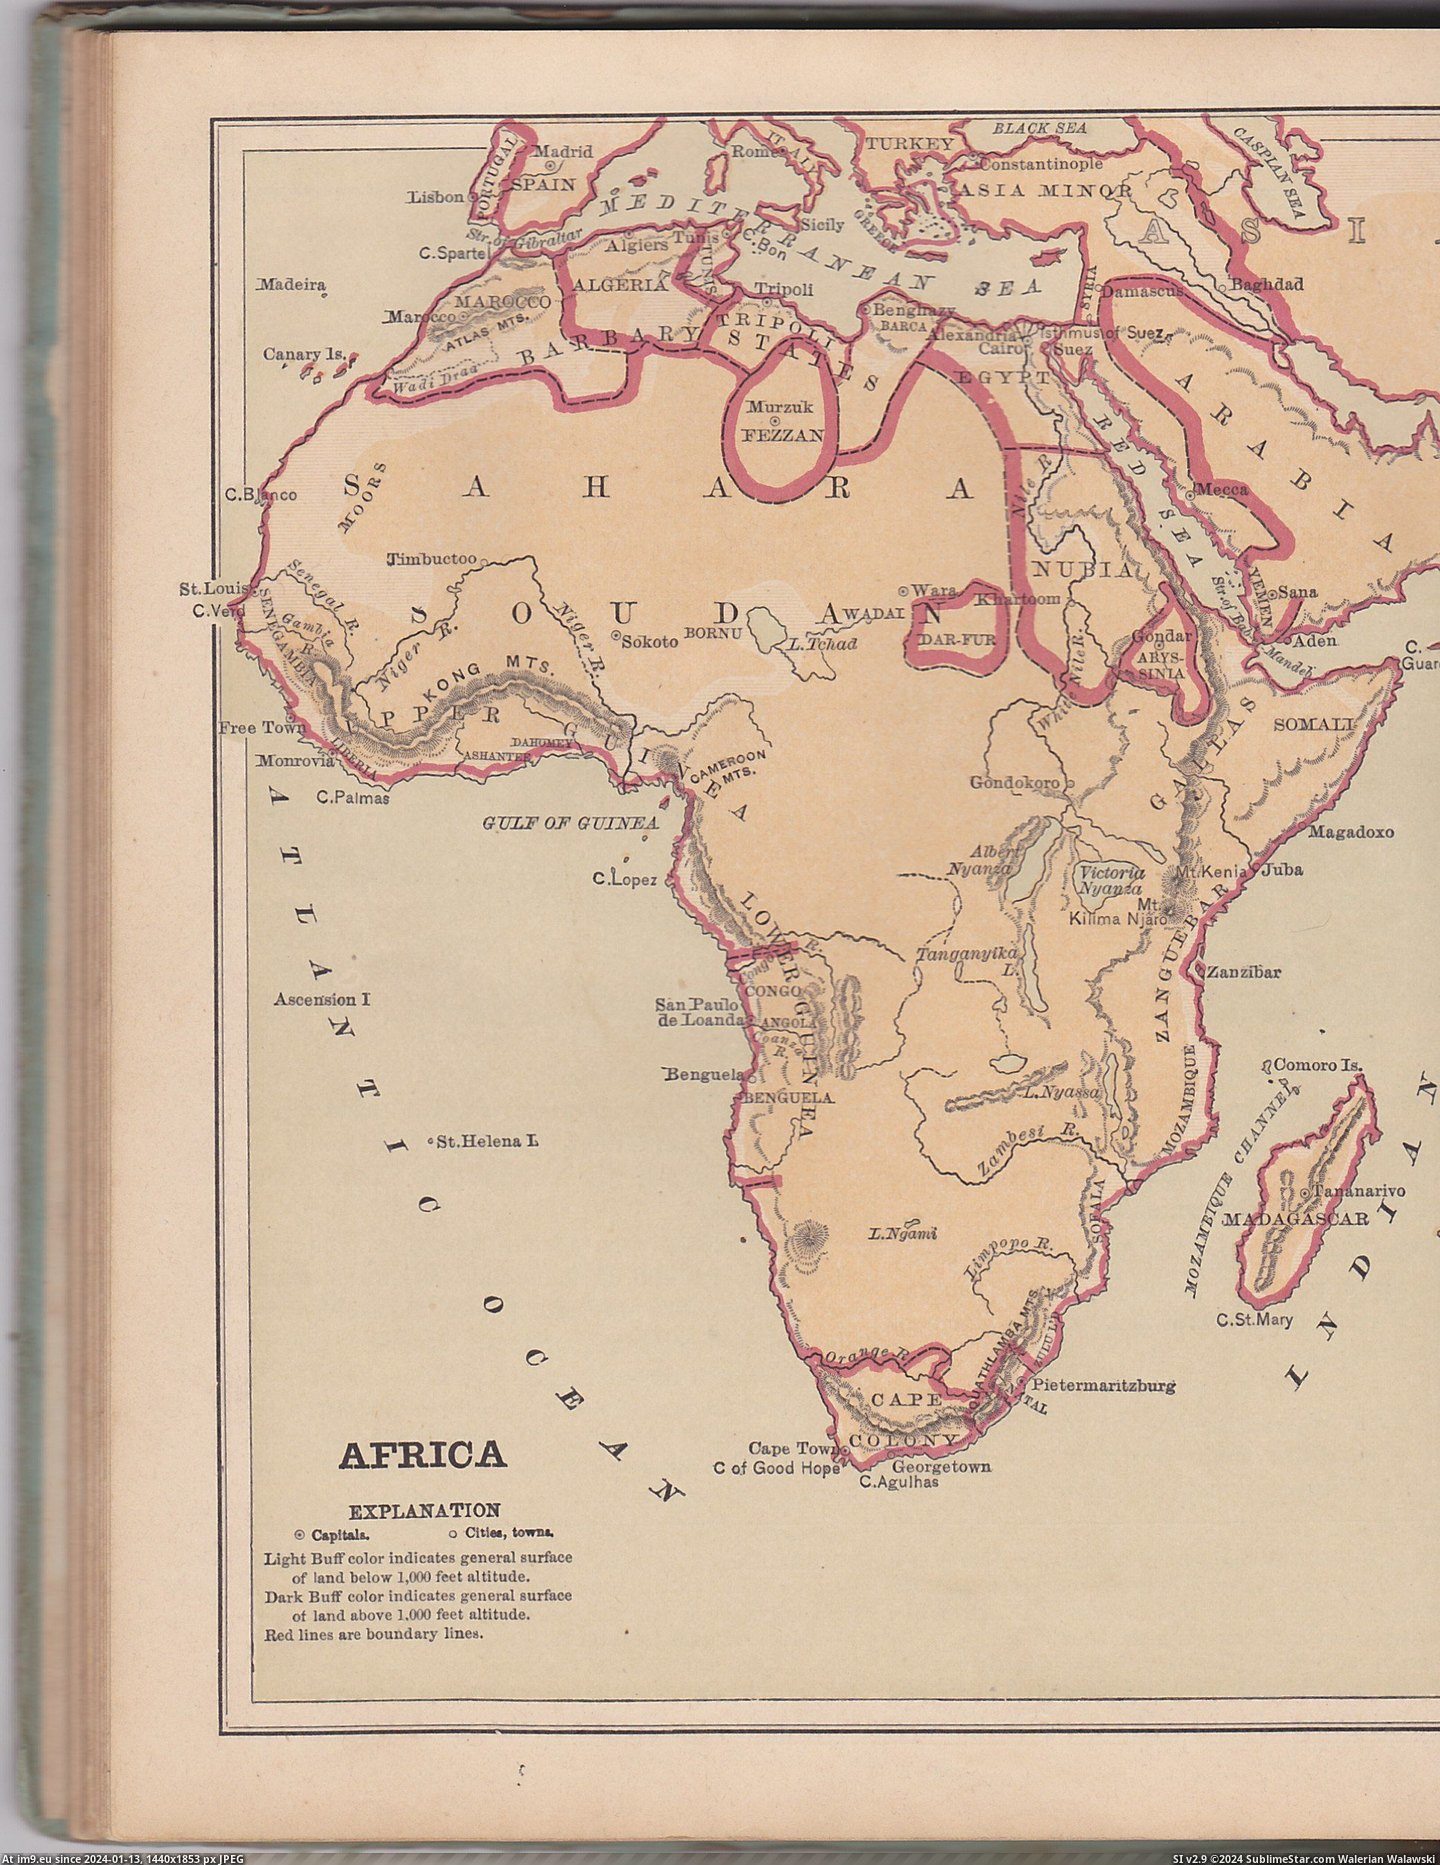 #Africa #Pre #Colonial #Guyot #Geography #Elementary [Mapporn] Pre-Colonial Africa in 1875, From 'Guyot's Elementary Geography' [OC][2080x2668] Pic. (Image of album My r/MAPS favs))